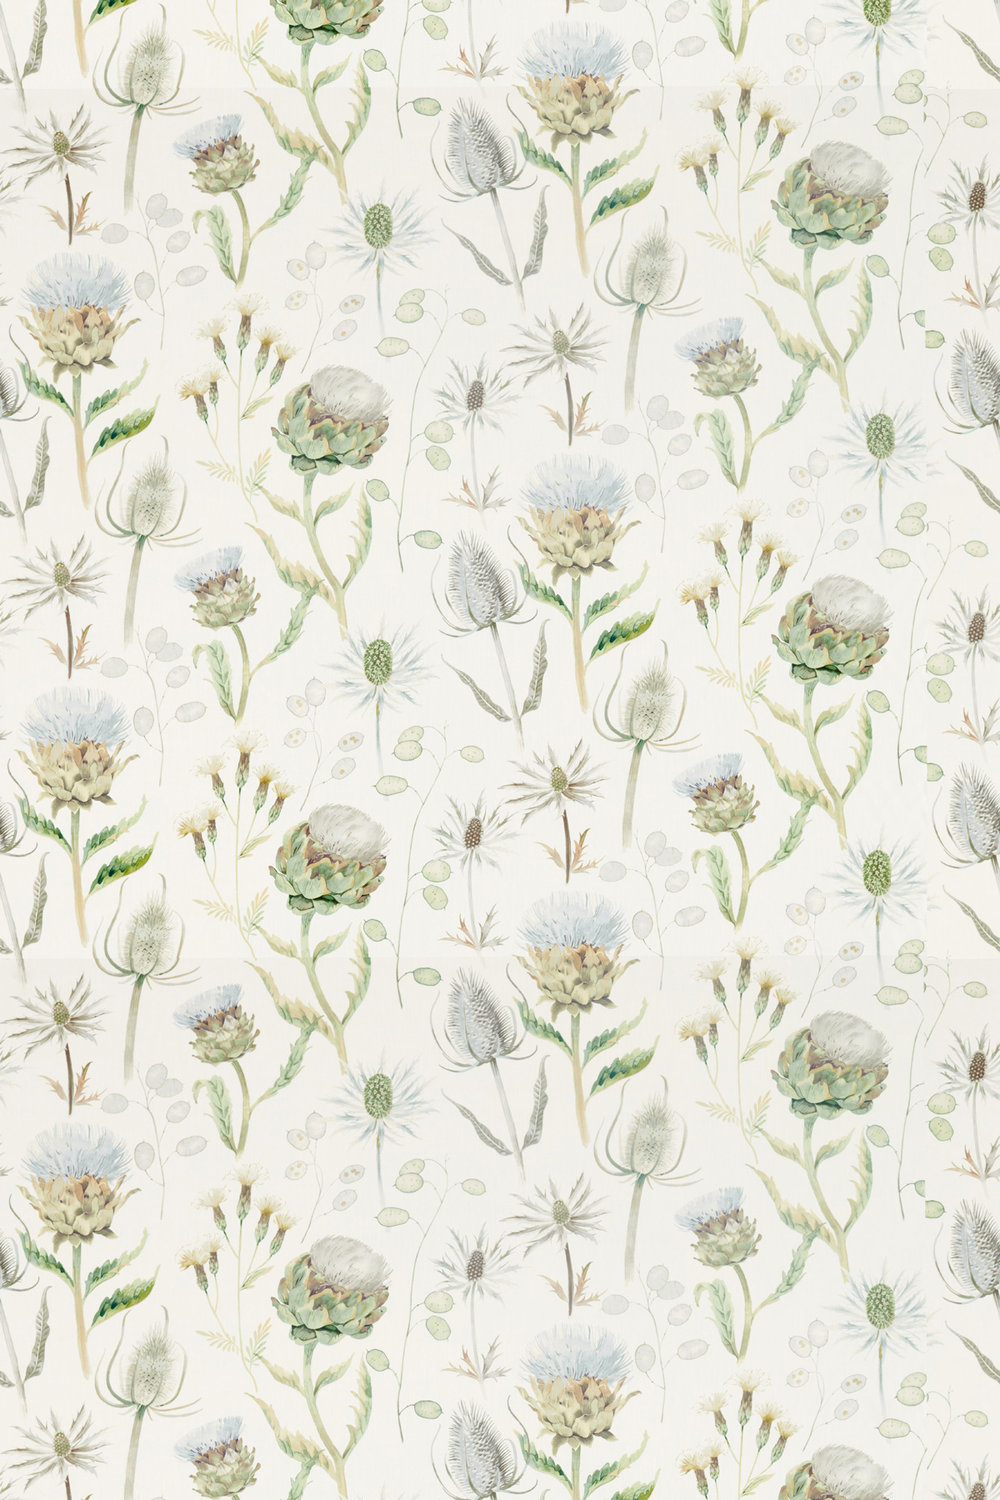 Thistle Garden Fabric - Mist and Pebble - by Sanderson